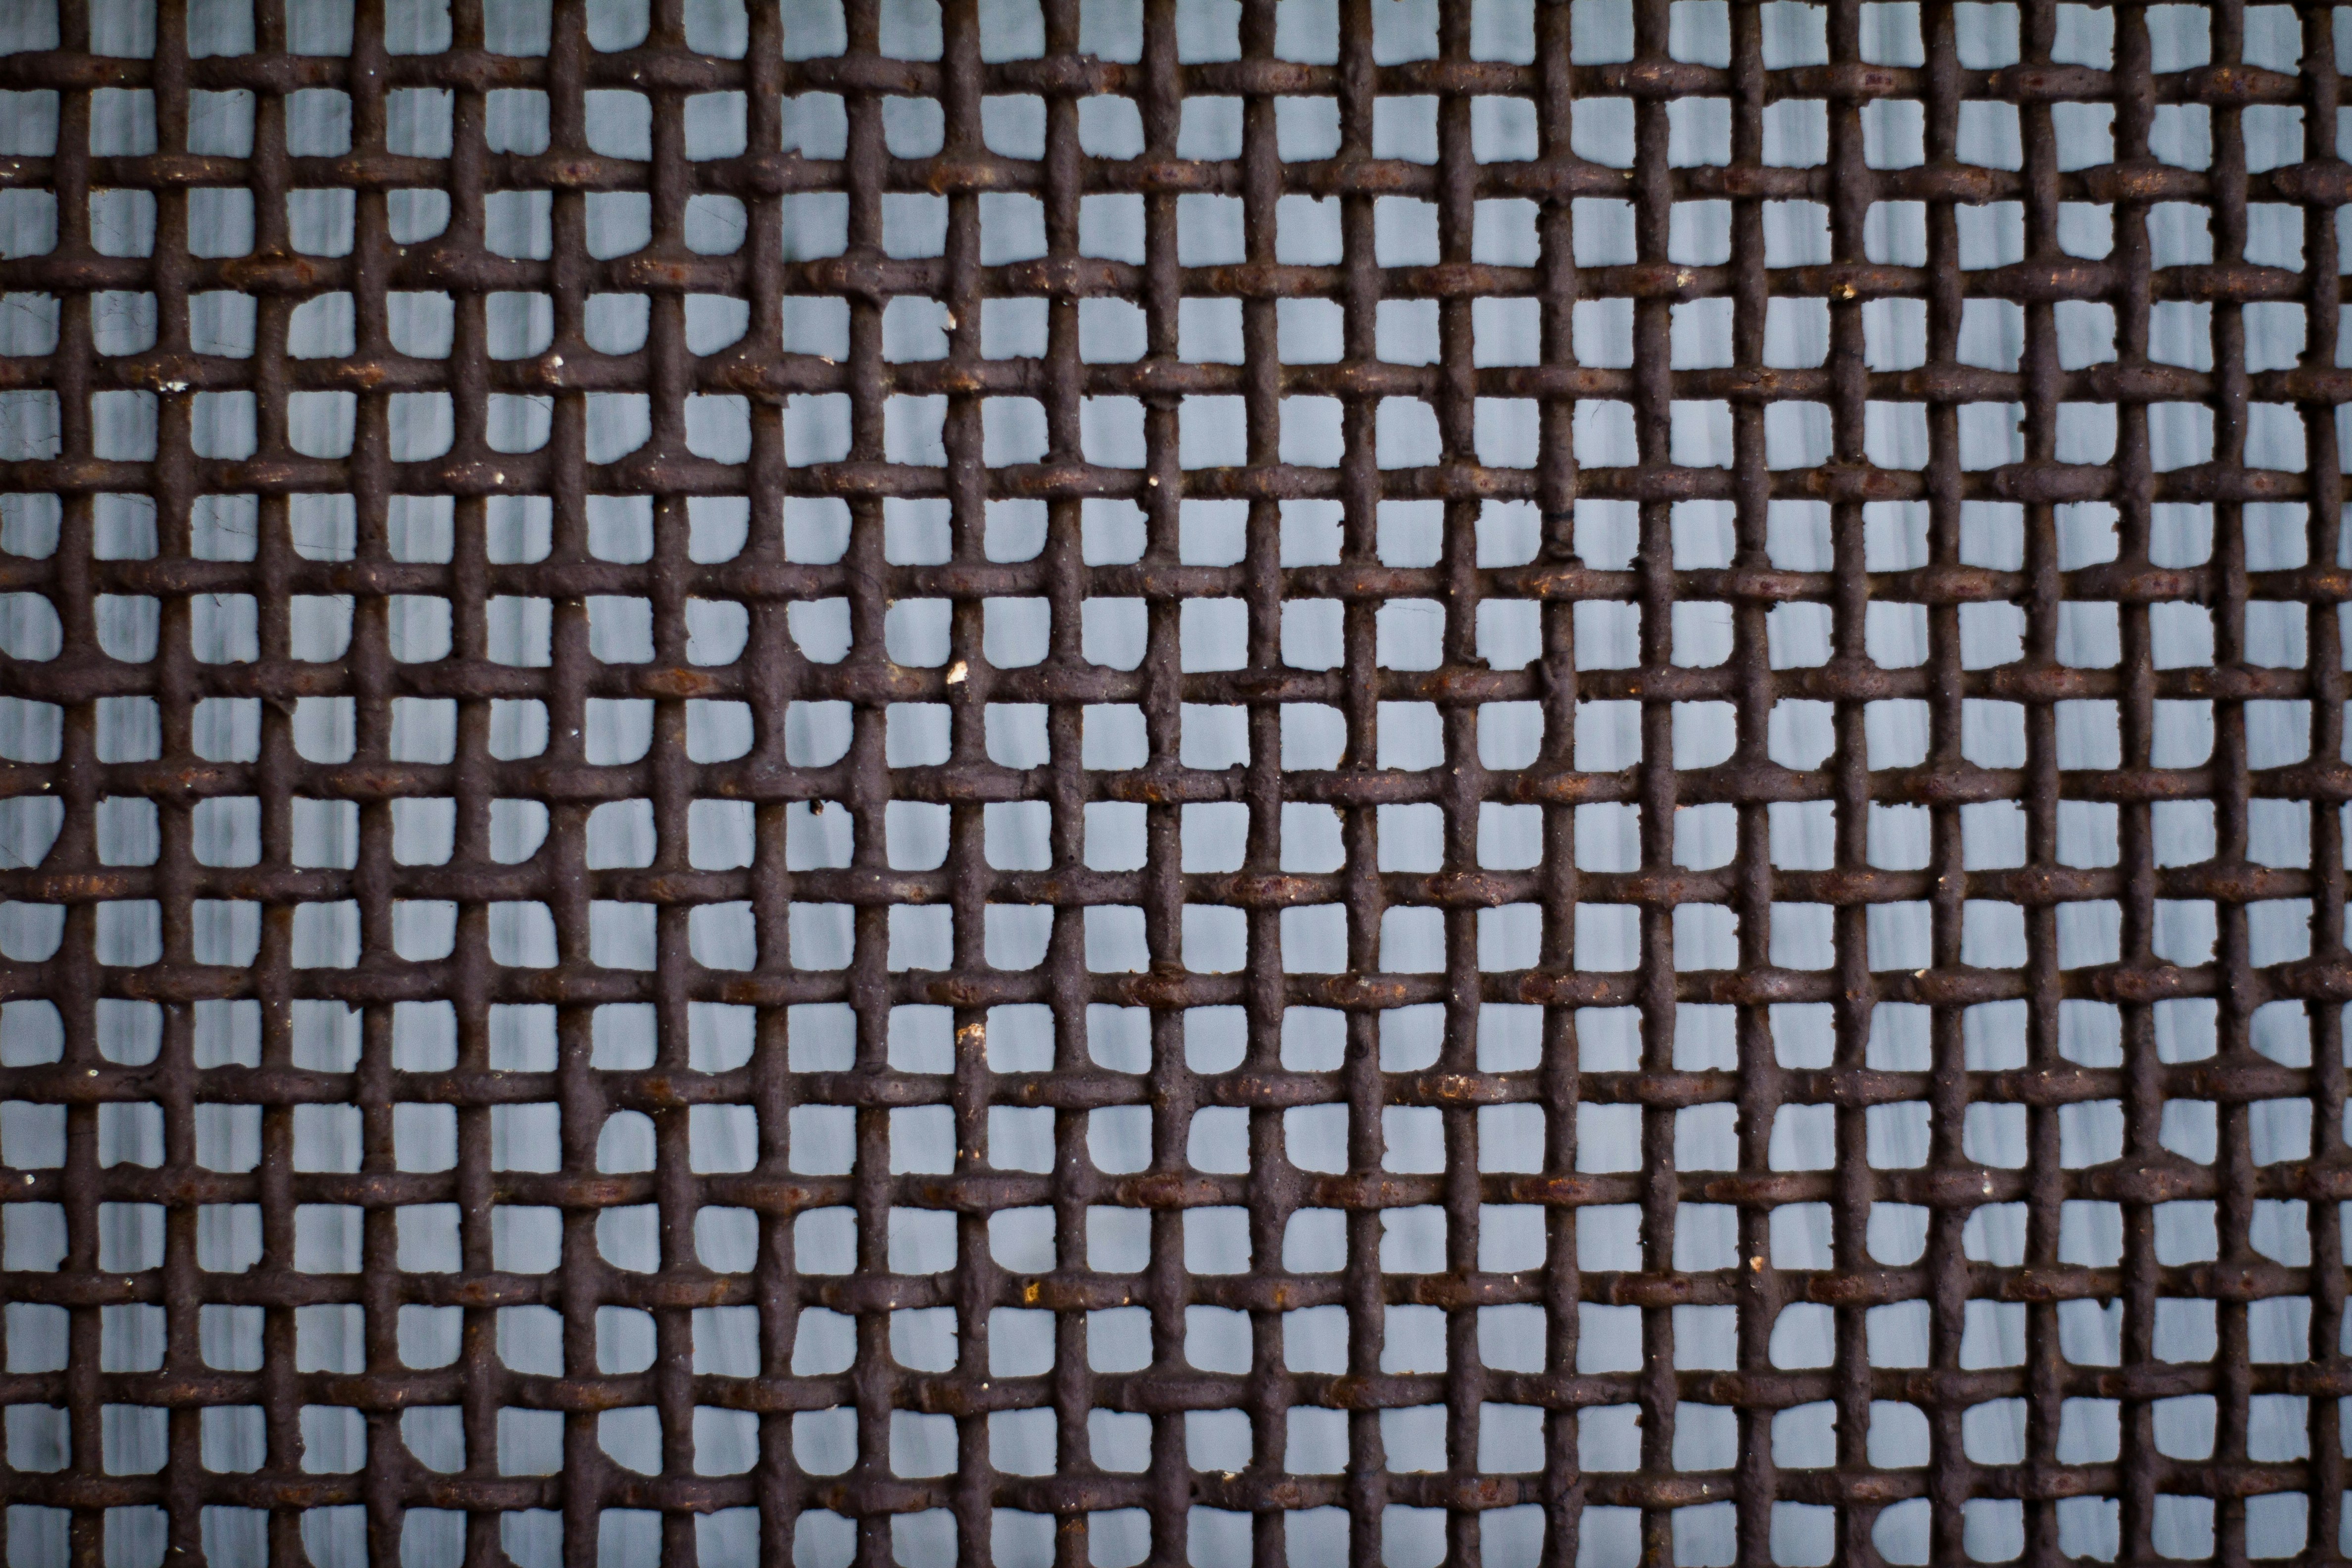 Arusted metal grate sits against a gray background.